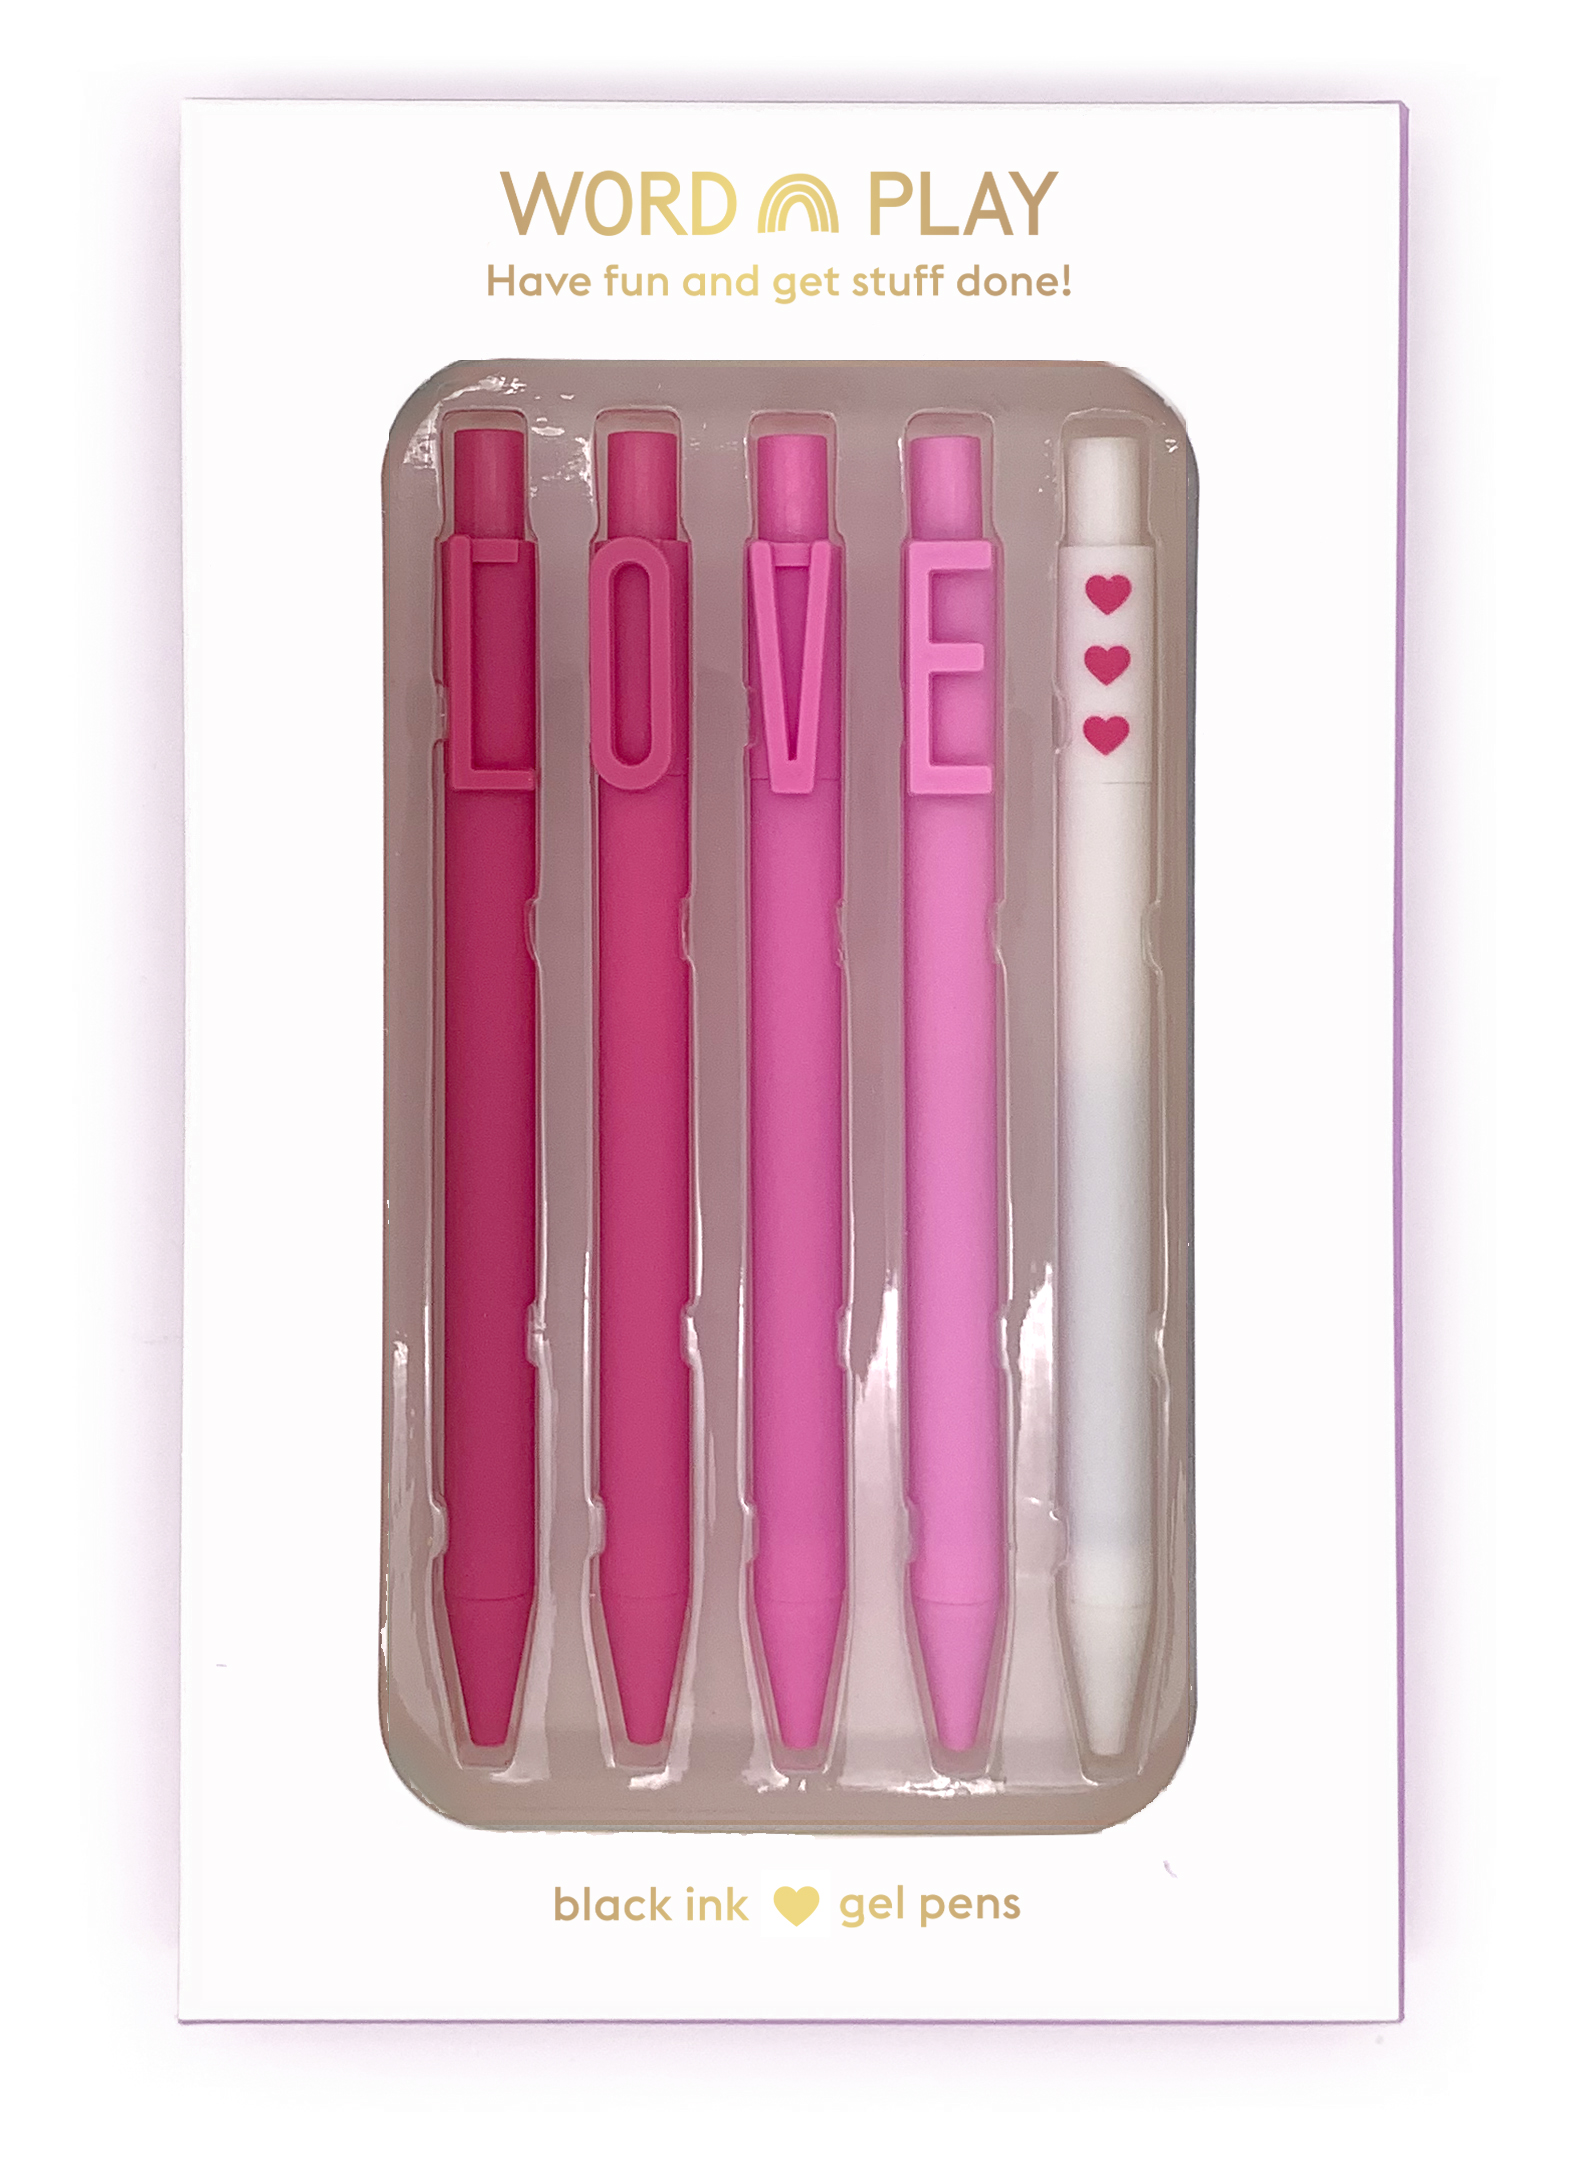 Dog Lovers Multicolor Pen Set, 5 Funny Pens Packaged for Gifting